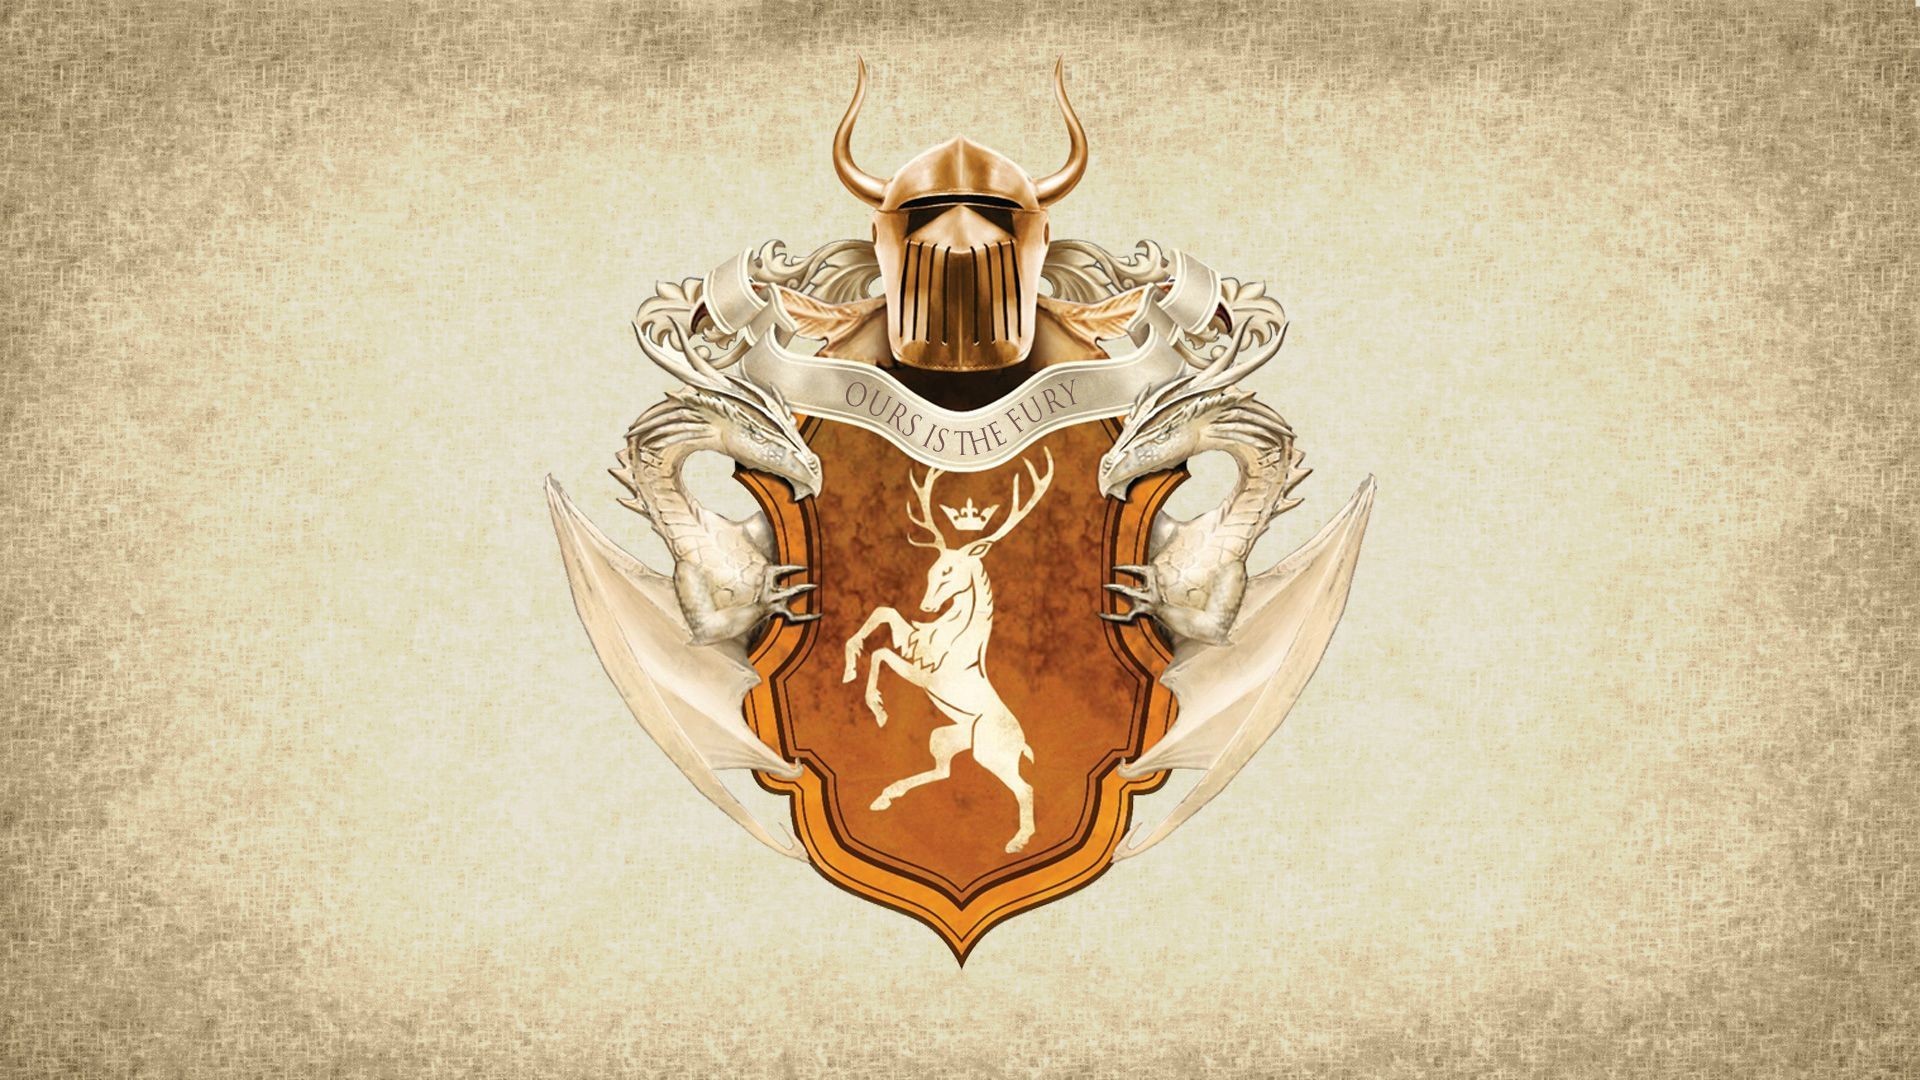 Coats Of Arms House Baratheon Sigils Crest Game Of Thrones 1920x1080